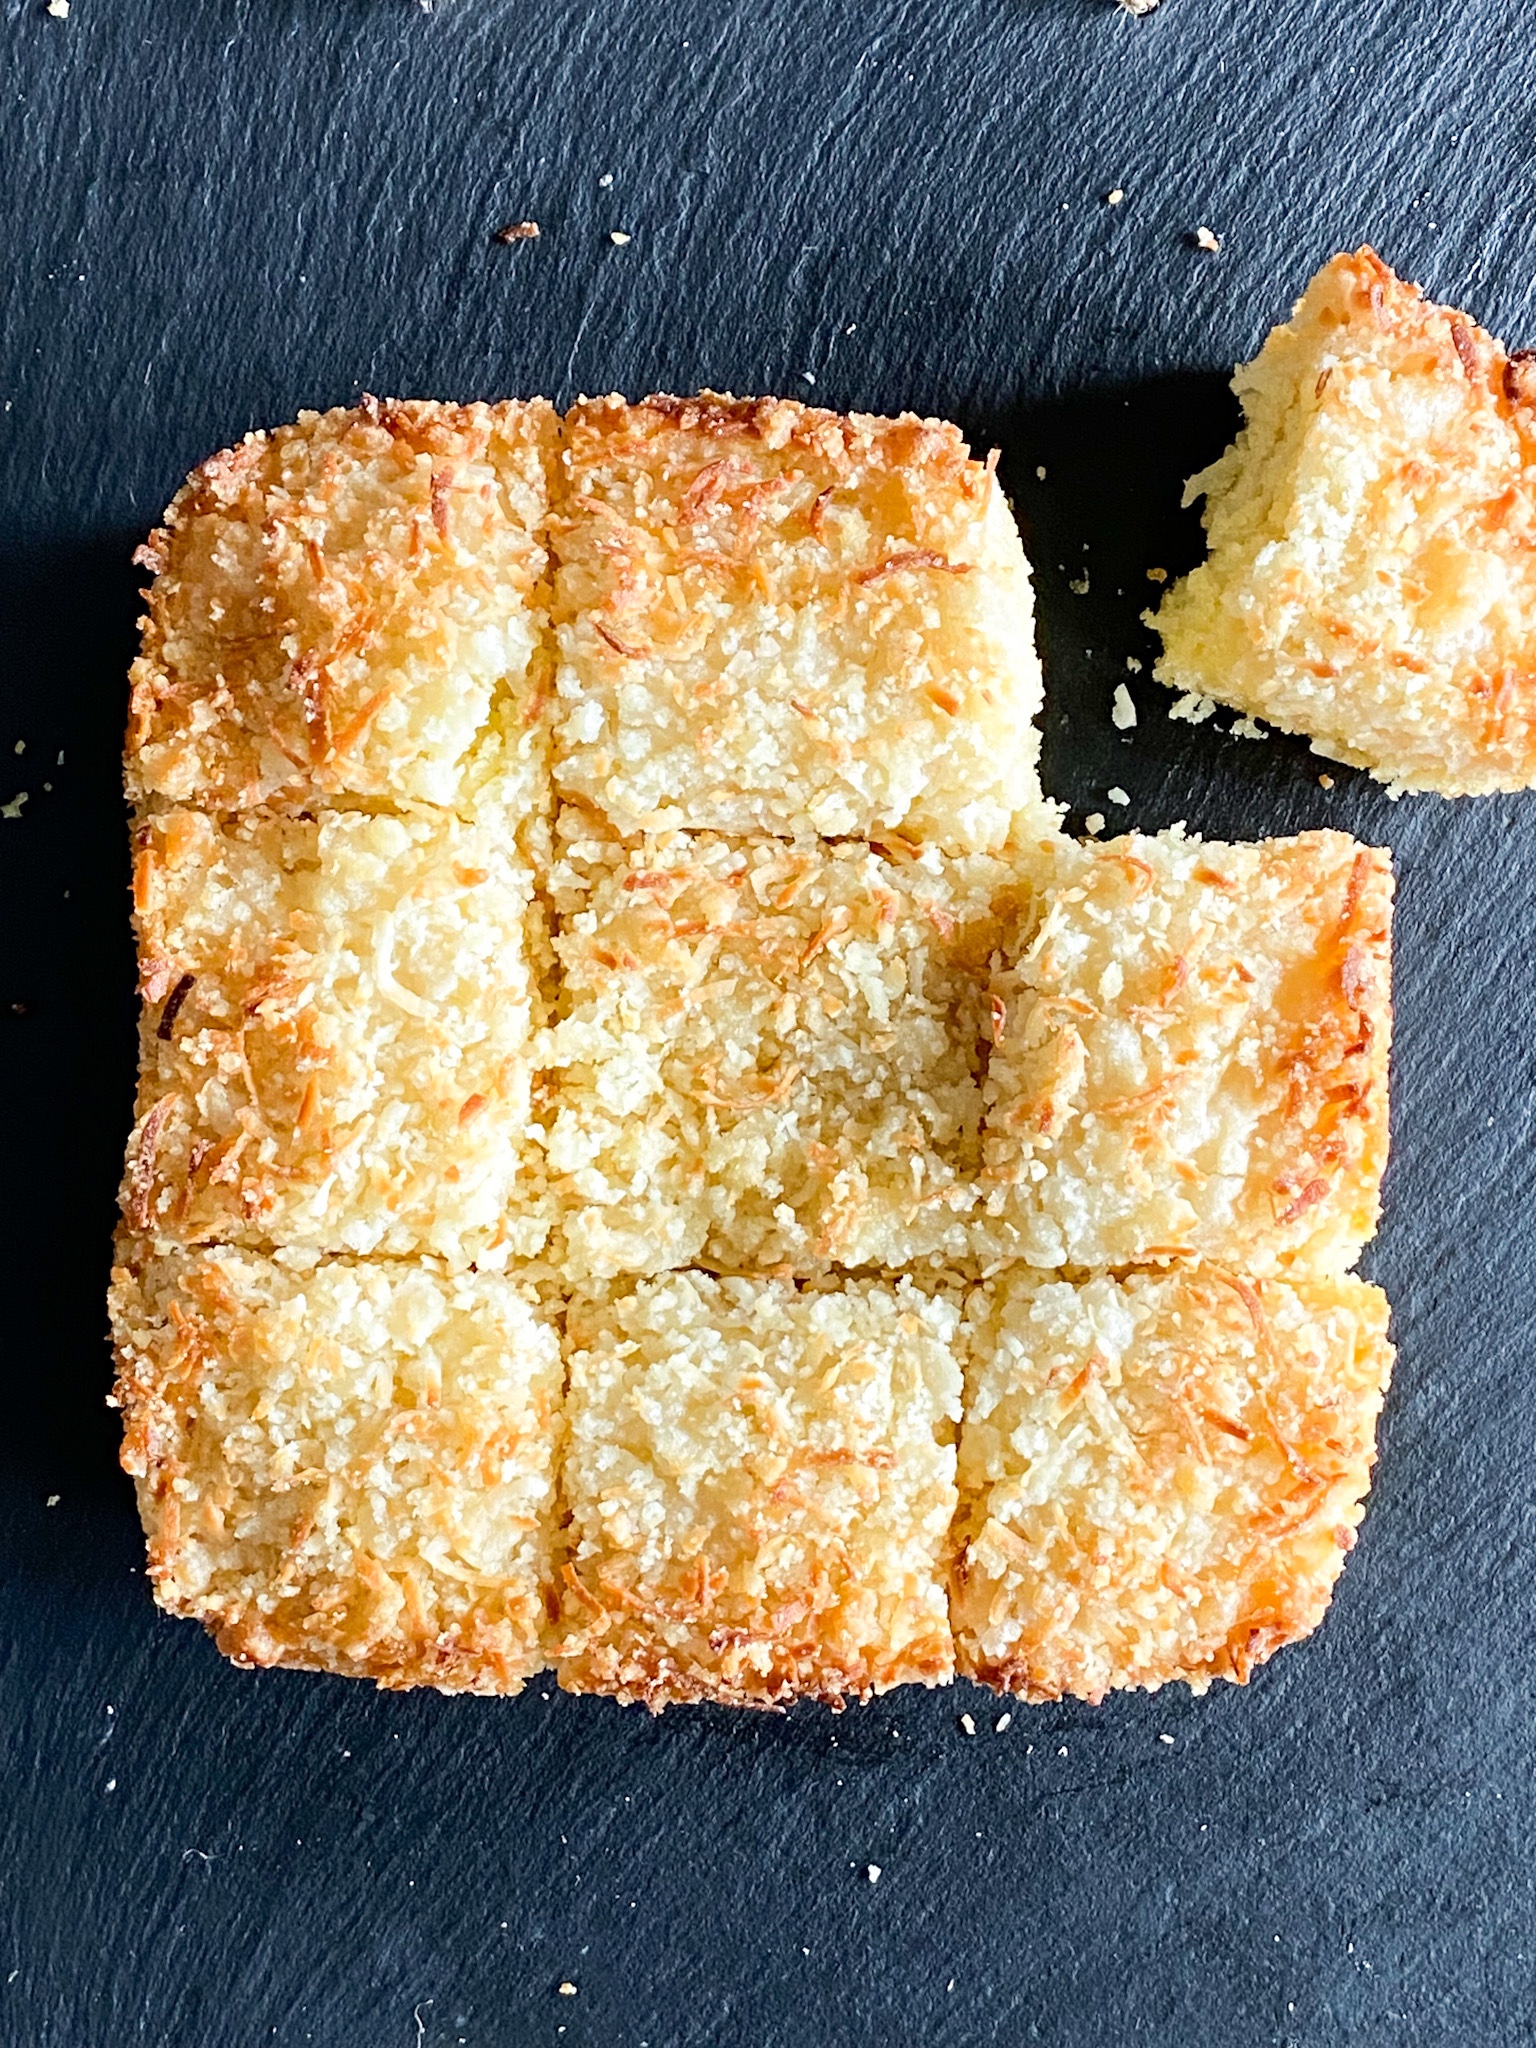 A square cake topped with toasted coconut and cut into nine pieces arranged on a slate surface.